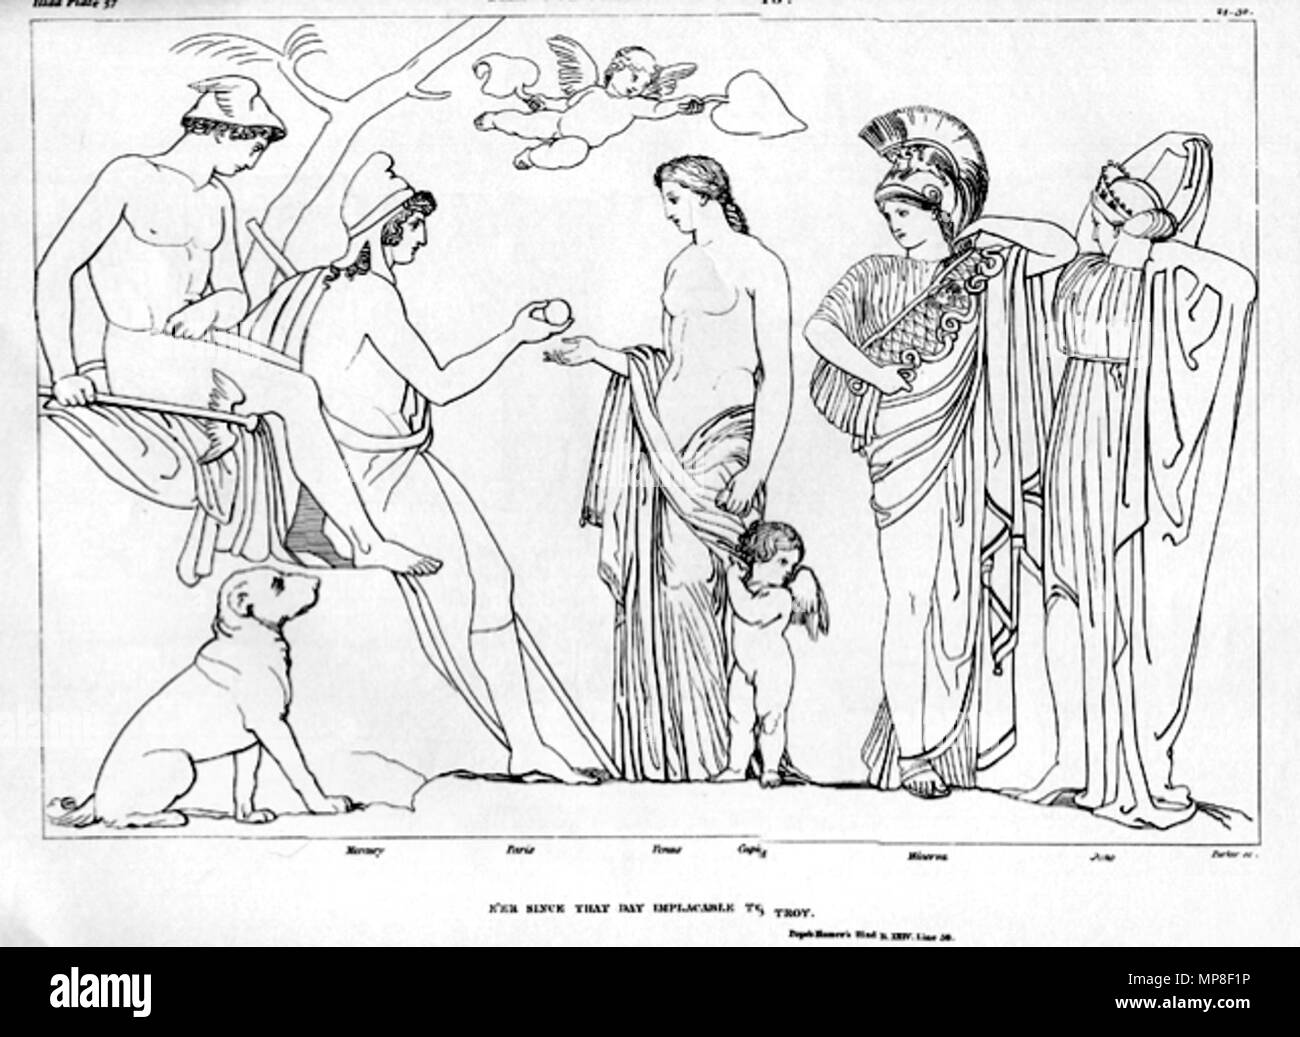 . English: The Judgment of Paris by John Flaxman . 1804.   John Flaxman  (1755–1826)      Alternative names John Flaxman II; John Flaxman (II); Flaxman; Flaxman junior  Description British painter, poet, sculptor and illustrator  Date of birth/death 6 July 1755 7 December 1826  Location of birth/death York London  Work location Florence (1787)  Authority control  : Q366066 VIAF: 17260670 ISNI: 0000 0001 2095 6665 ULAN: 500115449 LCCN: n50004058 NLA: 35088387 WorldCat 732 John Flaxman - The Judgment of Paris, from the Iliad Stock Photo